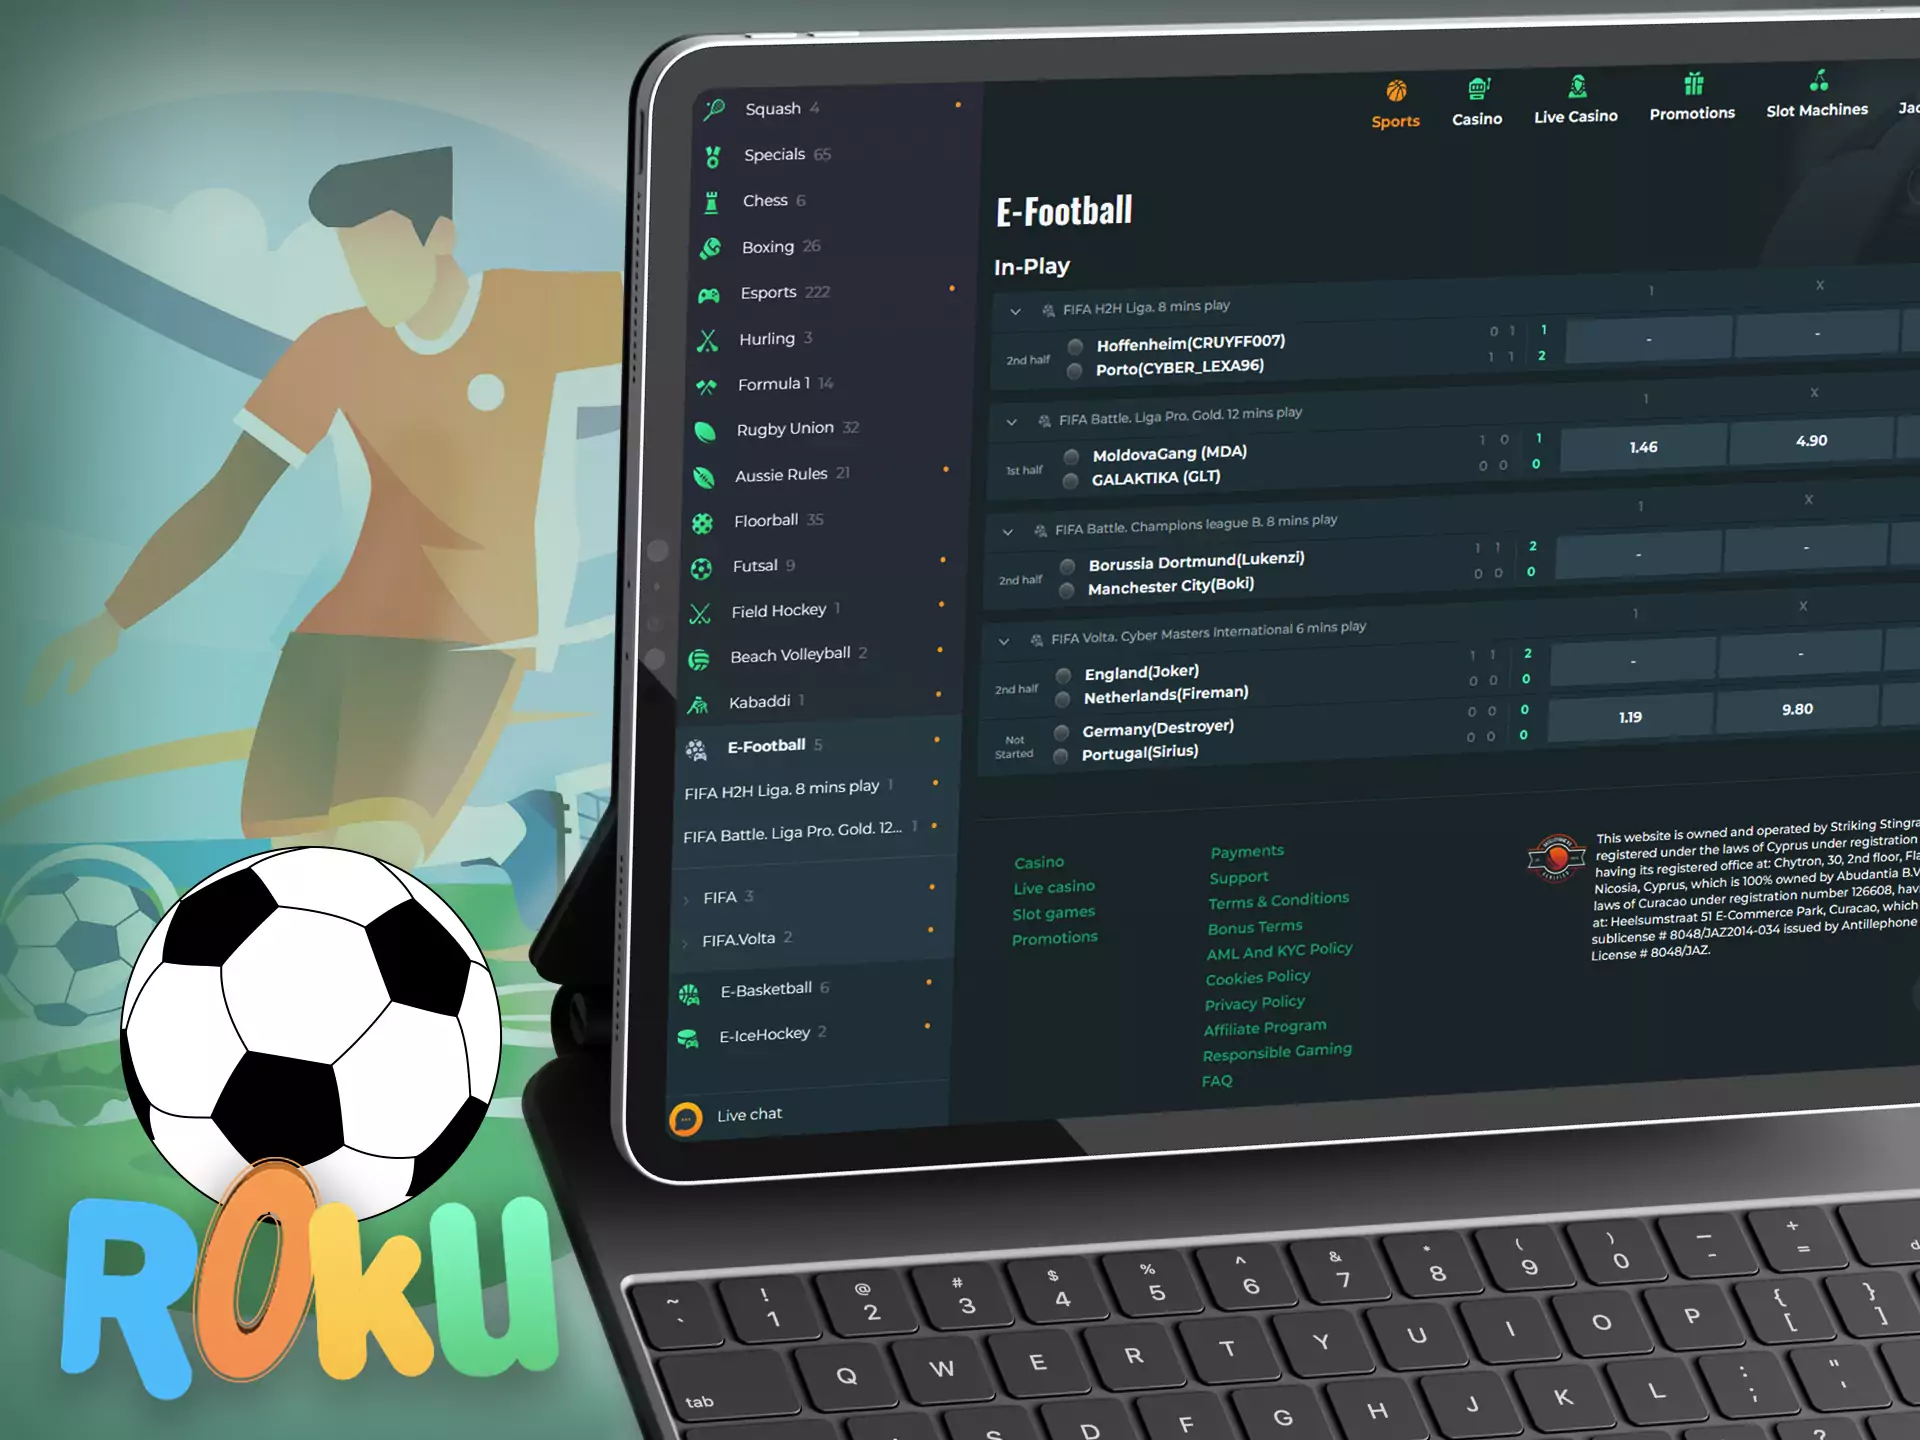 In the Rokubet e-sportsbook, there are e-football events available for online betting.